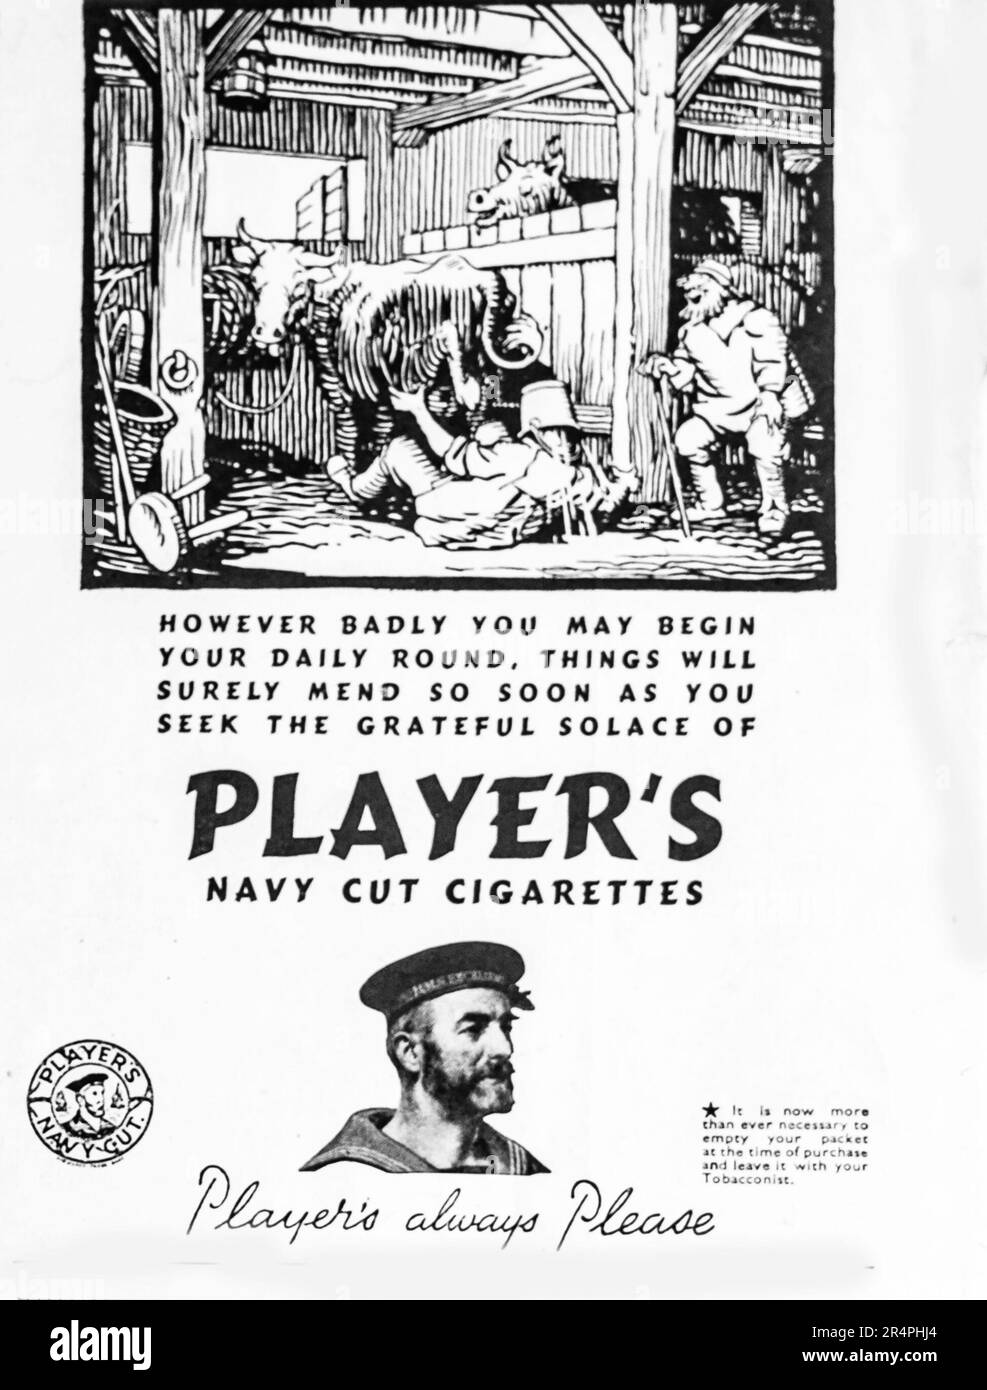 A 1941 advertisement for Players Navy Cut cigarettes. The  advertisement features a cartoon of a farmer whose day is not starting well and claims that things will improve if you seek the solace of the cigarettes. The brand was introduced in 1883 and discontinued in 2016. This wartime advert also suggests emptying the packet at the time of purchase and leaving the package with the shopkeeper, presumably to cope with wartime shortages. An early form of recycling. Stock Photo